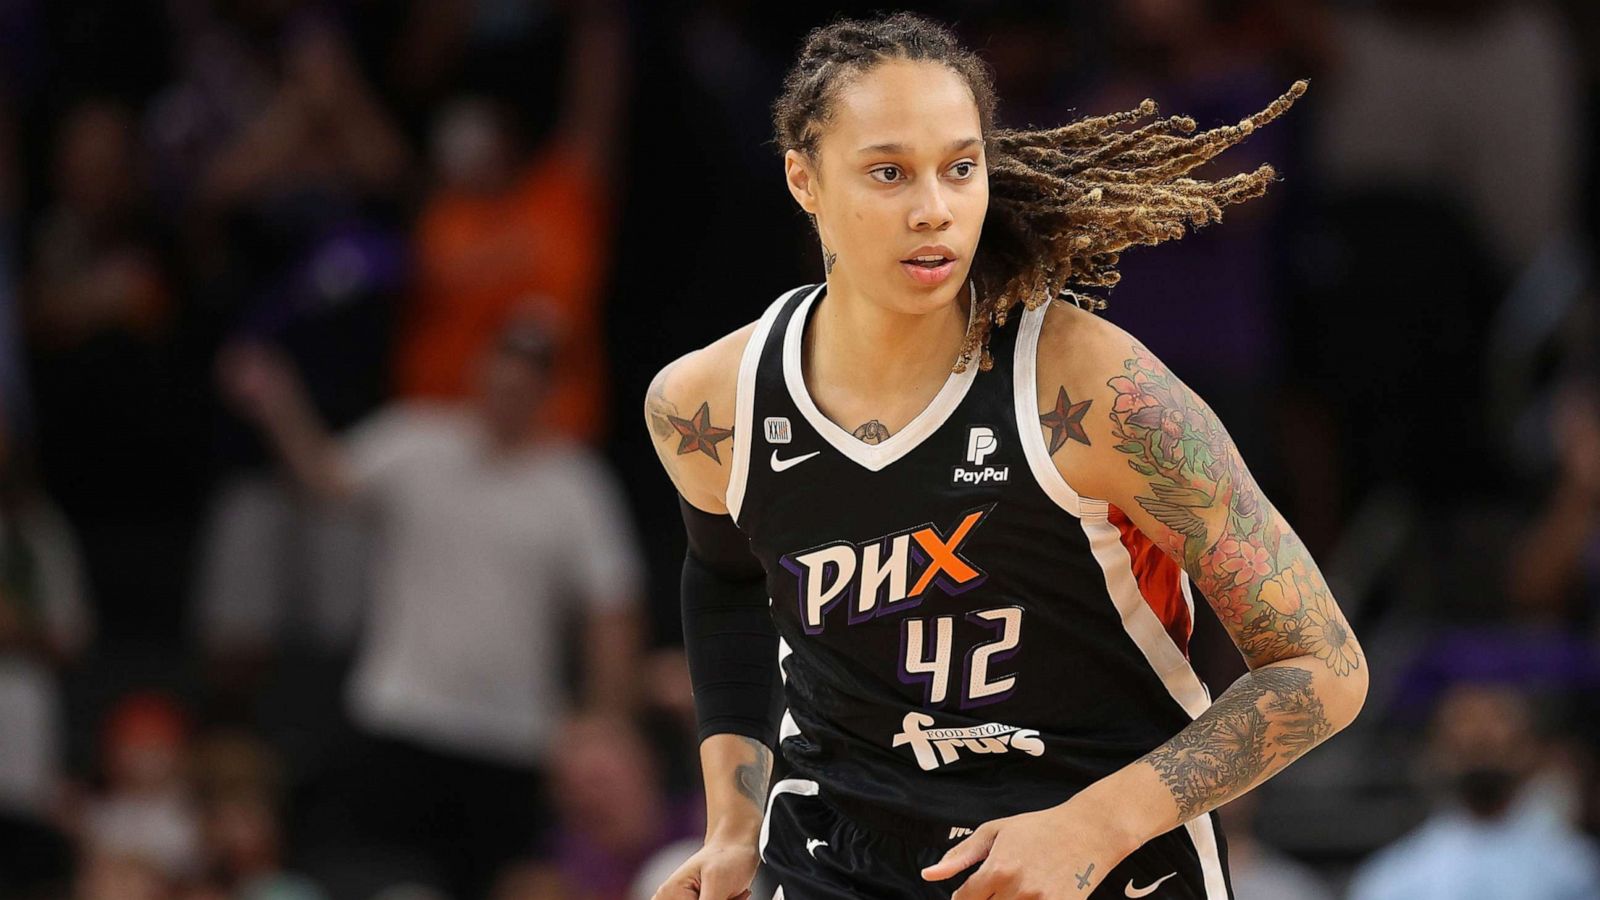 Brittney Griner, WNBA Stars Live Lavishly Playing for Russian Oligarch